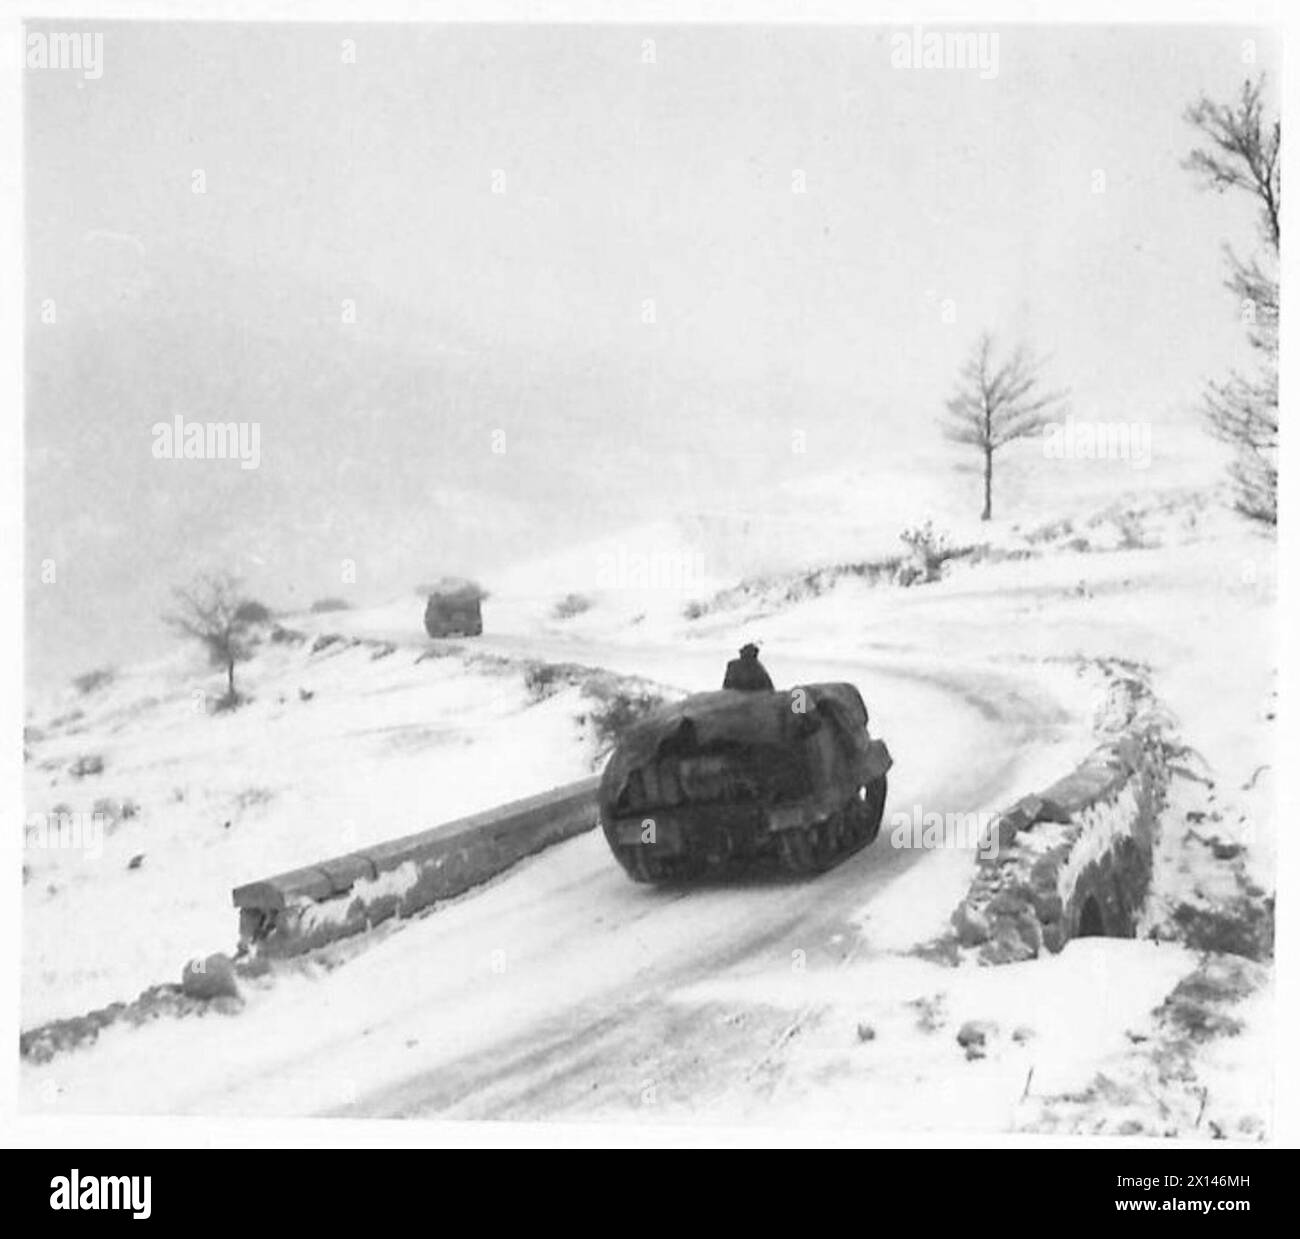 THE POLISH ARMY IN THE ITALIAN CAMPAIGN, 1943-1945 - Universal Carrier of the 3rd Carpathian Rifles Division (2nd Polish Corps) dashes across a bridge on Carpinone - Agnone road during a heavy snowstorm, 25 March 1944 Polish Army, Polish Armed Forces in the West, Polish Corps, II, Polish Armed Forces in the West, Carpathian Rifles Divisior, 3, 8th Army Stock Photo